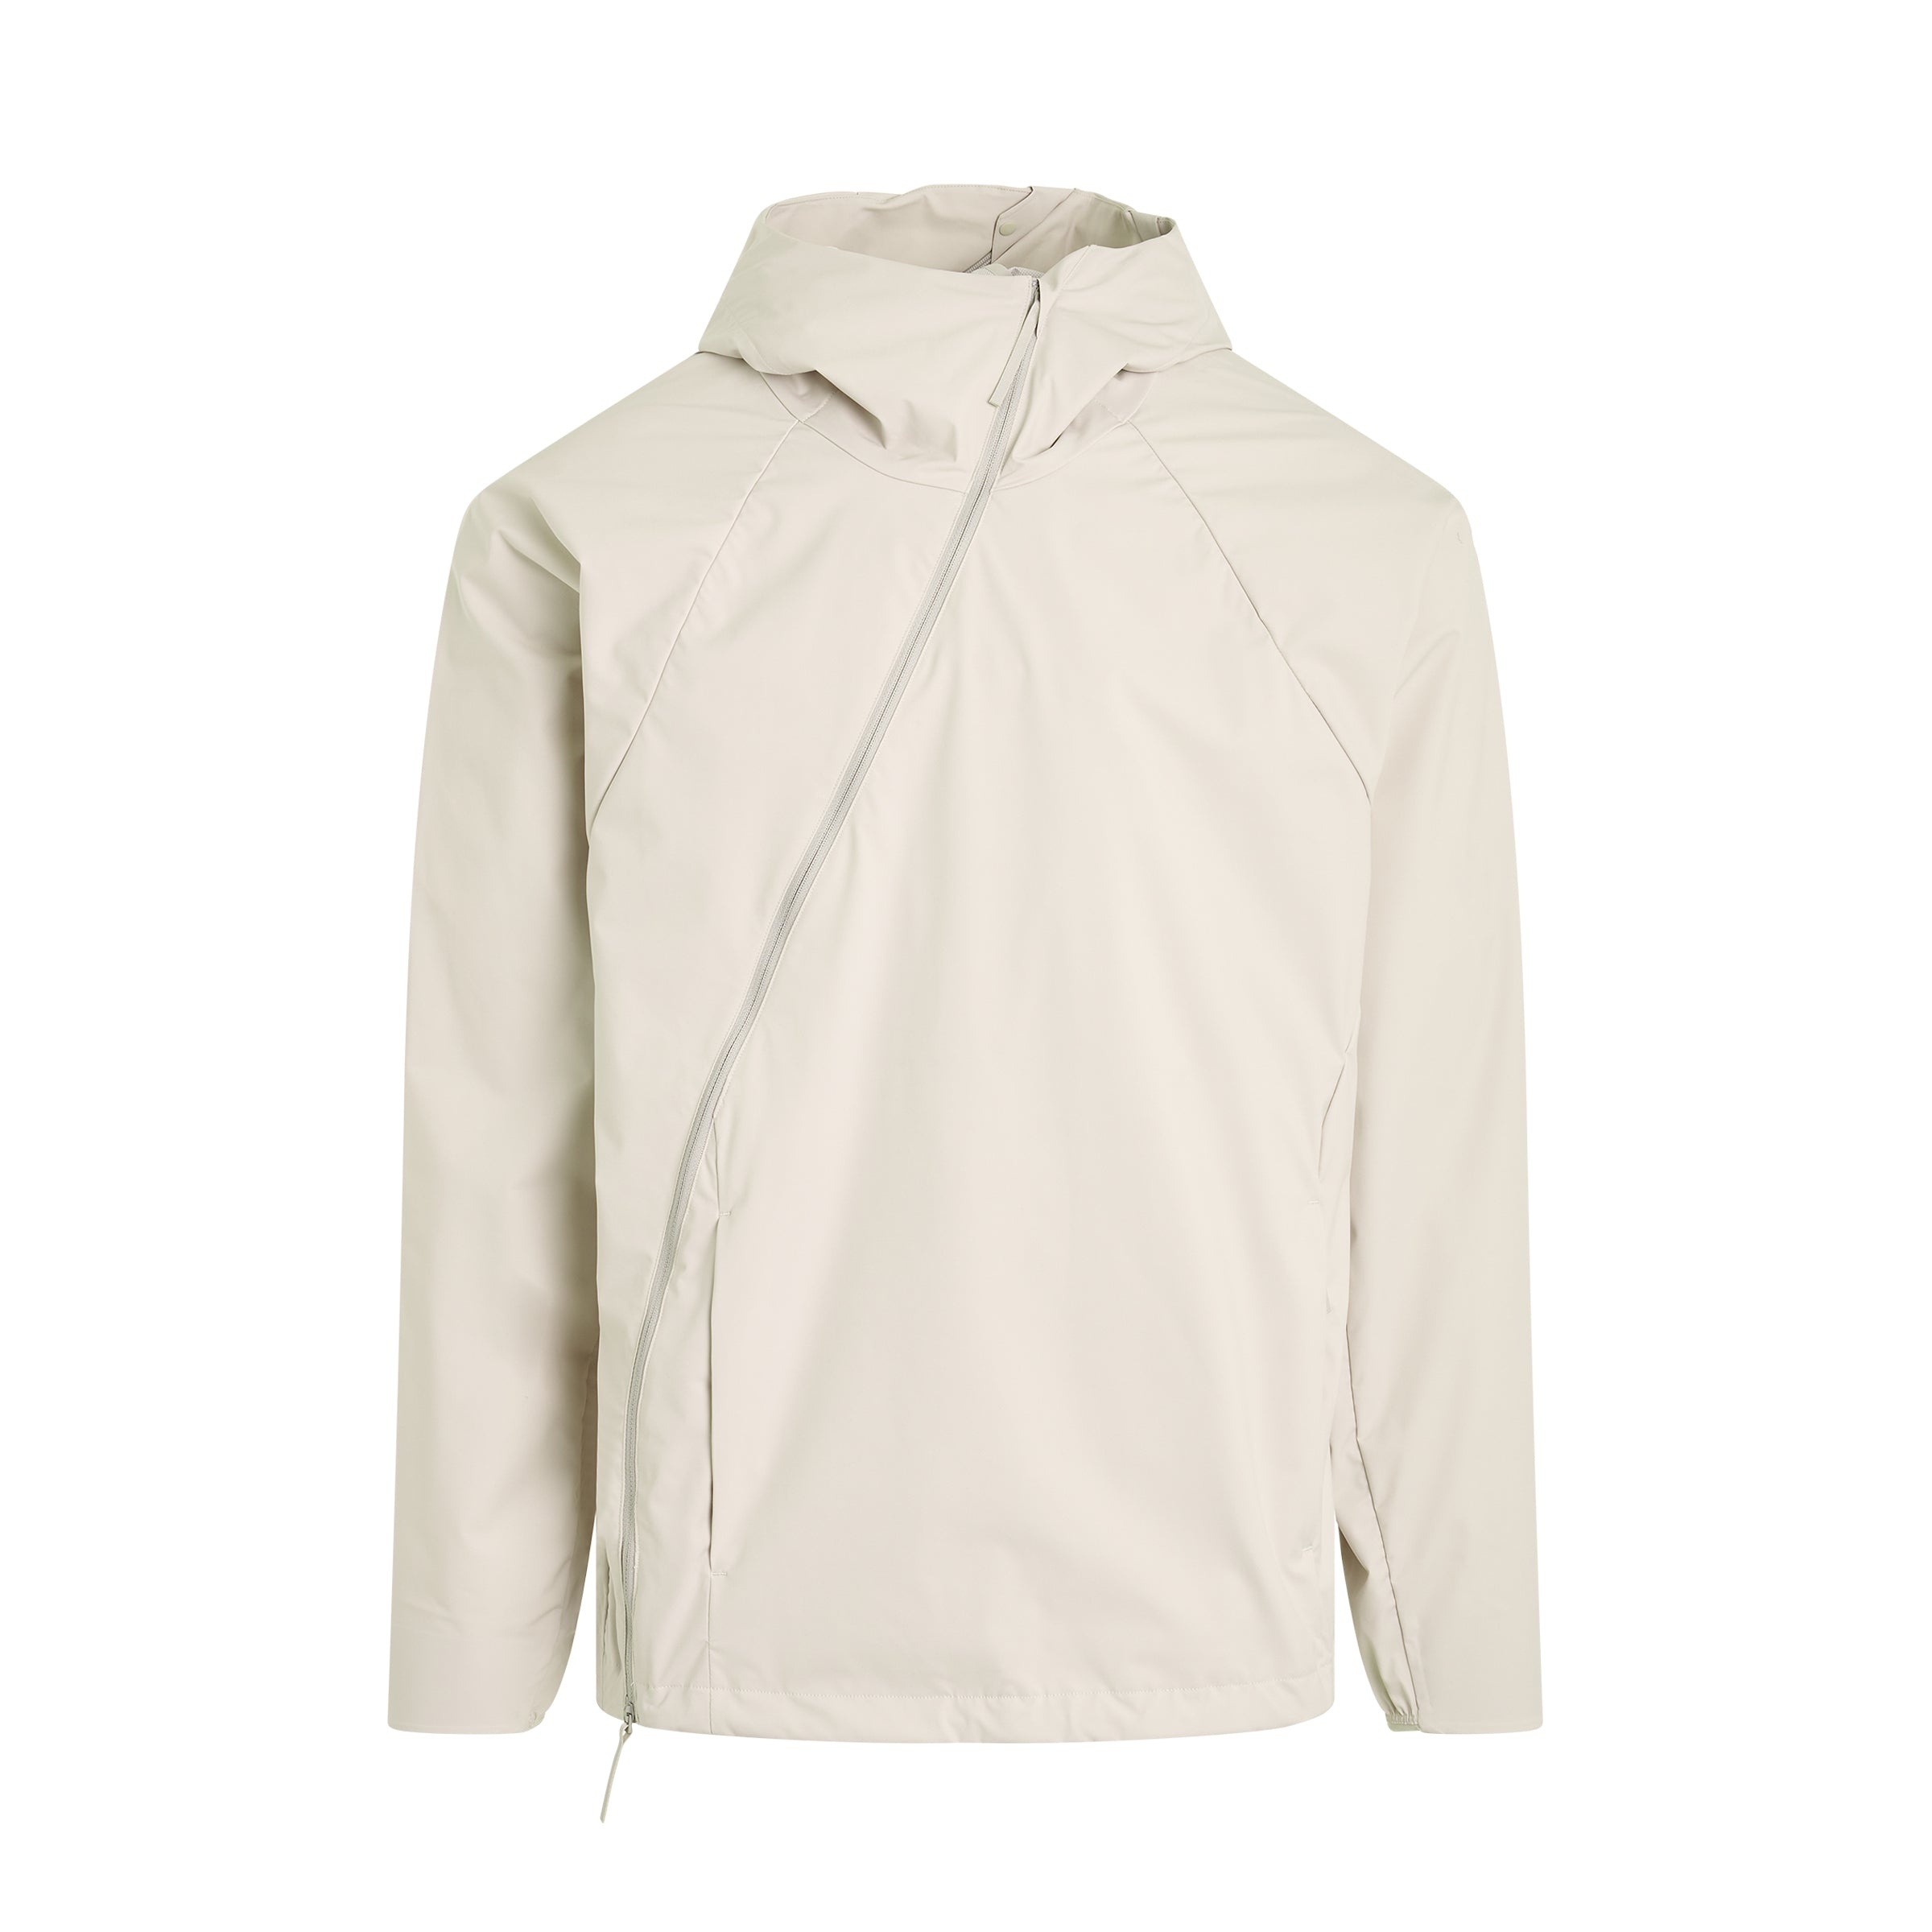 6.0 Technical Jacket (Center) in Ivory - 1